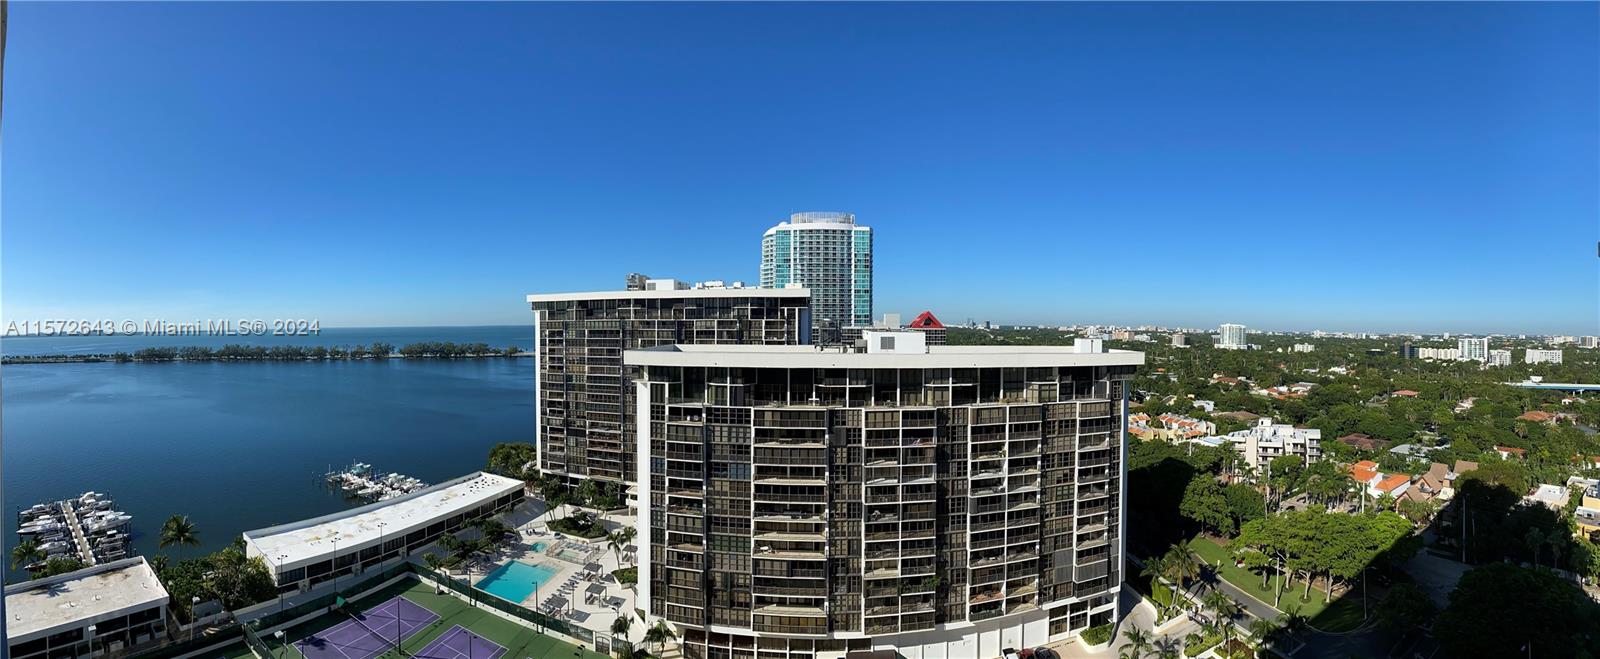 DIRECT OCEAN/CITY  VIEW COMPLETELY REMODOLED  LARGE 1 DEROOM 1-1/2 BATH ON THE HEART OF BRICKELL AVE. WOOD FLOOR THRU-OUT STAINLESS STEEL APPLIANCE. SPECIOUS TERRACE. AMENITIES 24 HOUR SECURITY GARD, POOL, EXECISE ROOM, TENNIS AND SQUASH  COURT BBQ AREA, CHILDREN PLAY GROUND, MARINA IN THE COMPLEX:  AVAILABLE FOR JUNE 3, 2024.